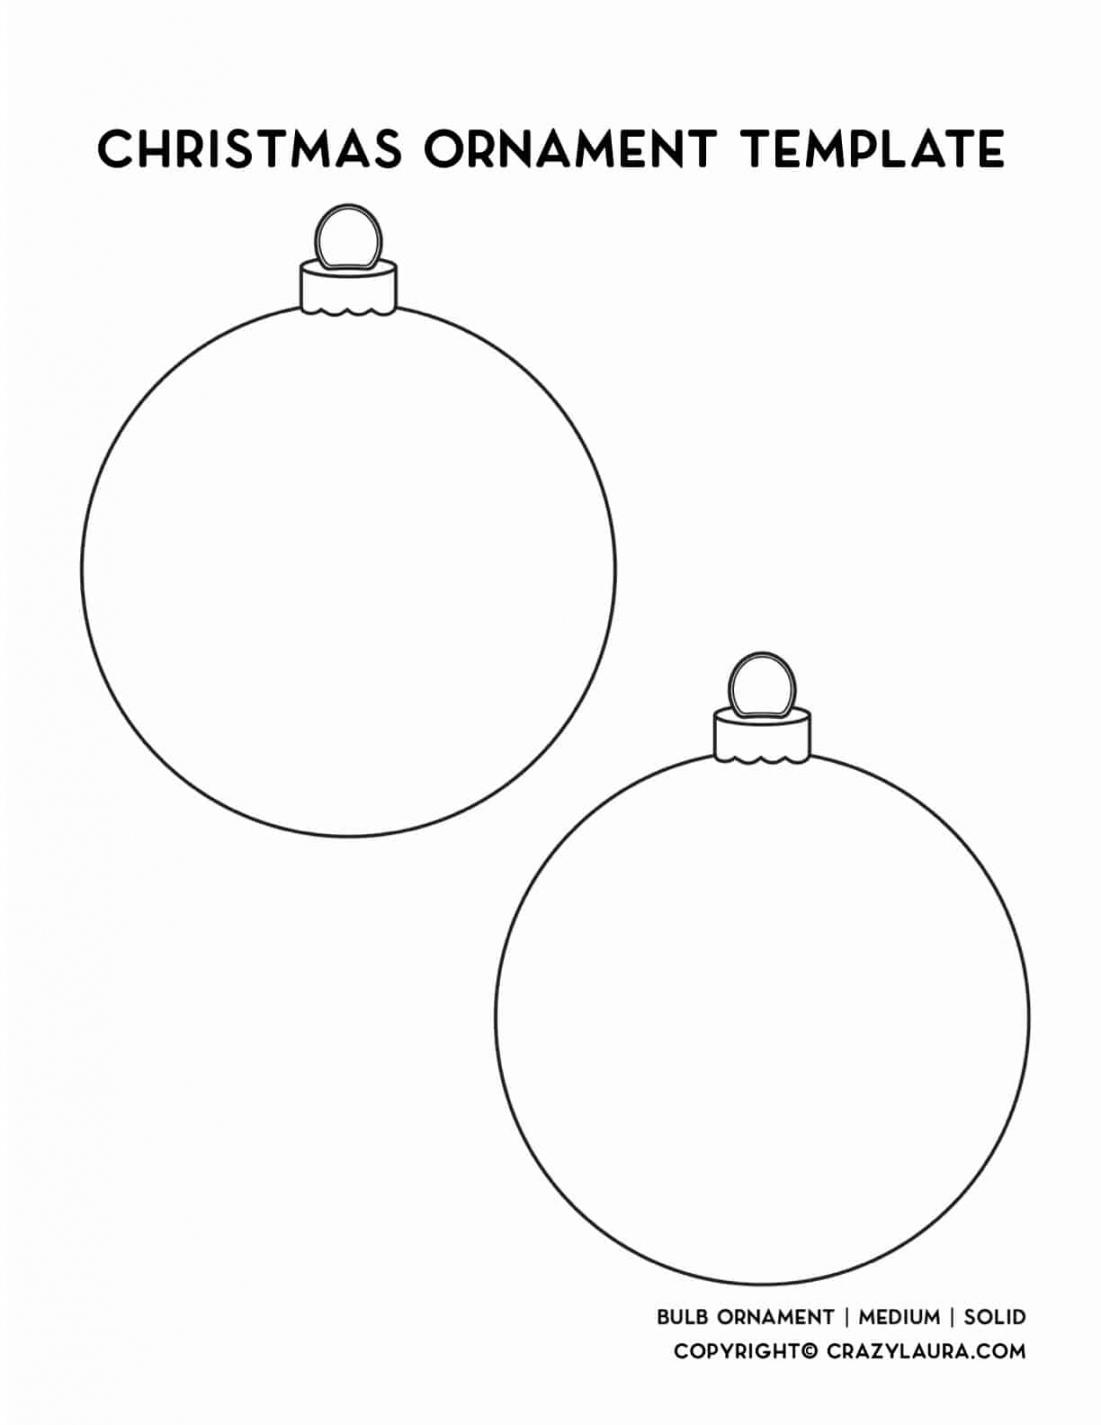 Free Christmas Ornament Template Printables & Outlines - Crazy Laura - FREE Printables - Printable Ornament Template